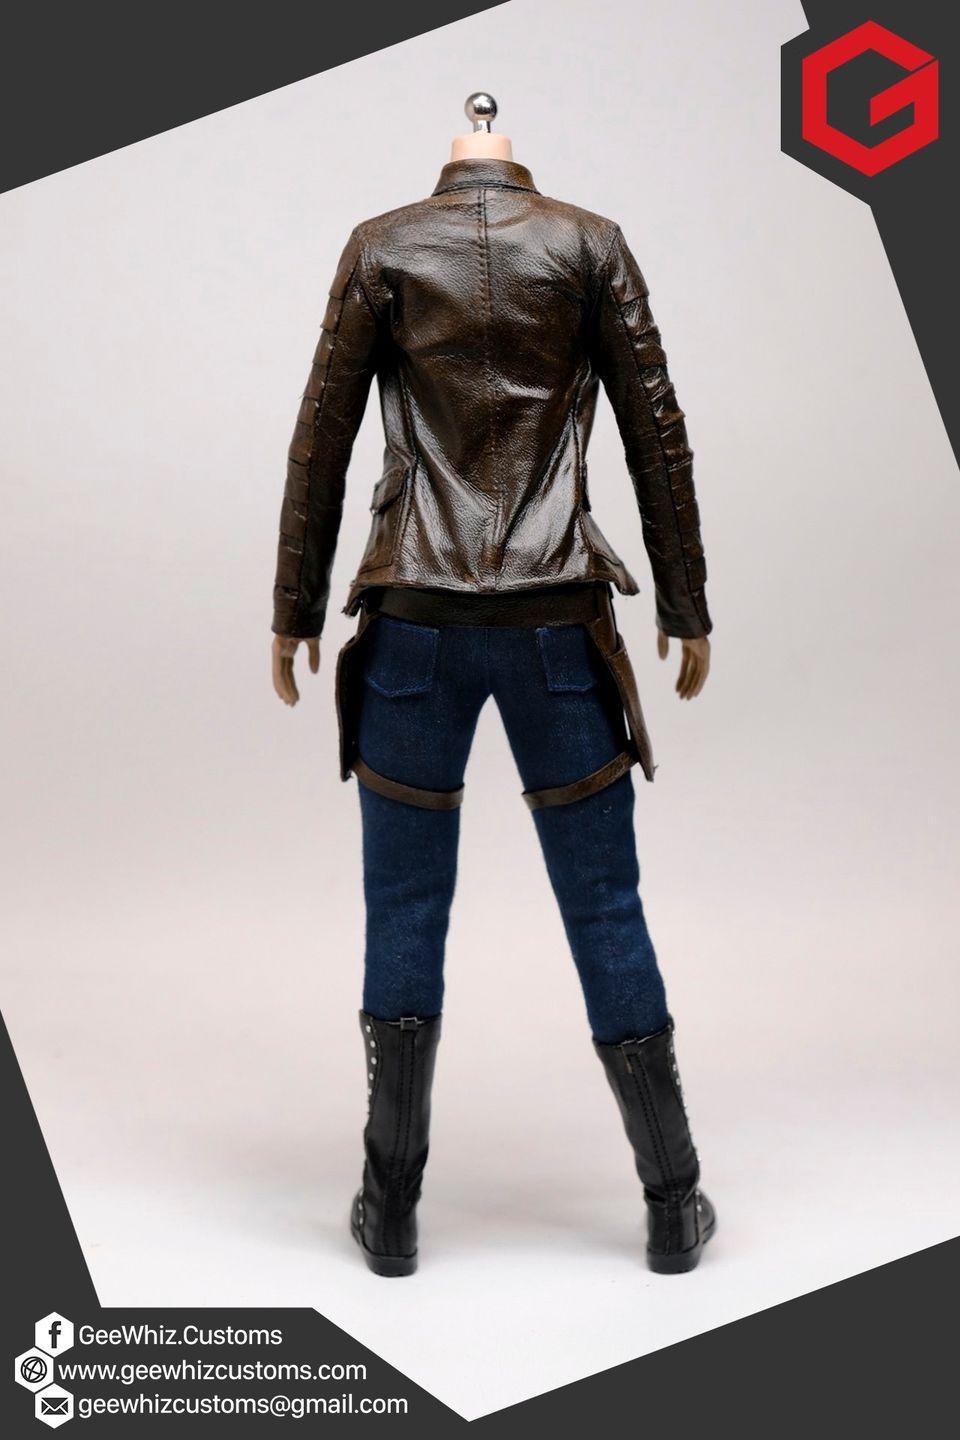 Geewhiz Customs: Lara Croft Concept Reboot 1:6 Scale Outfit